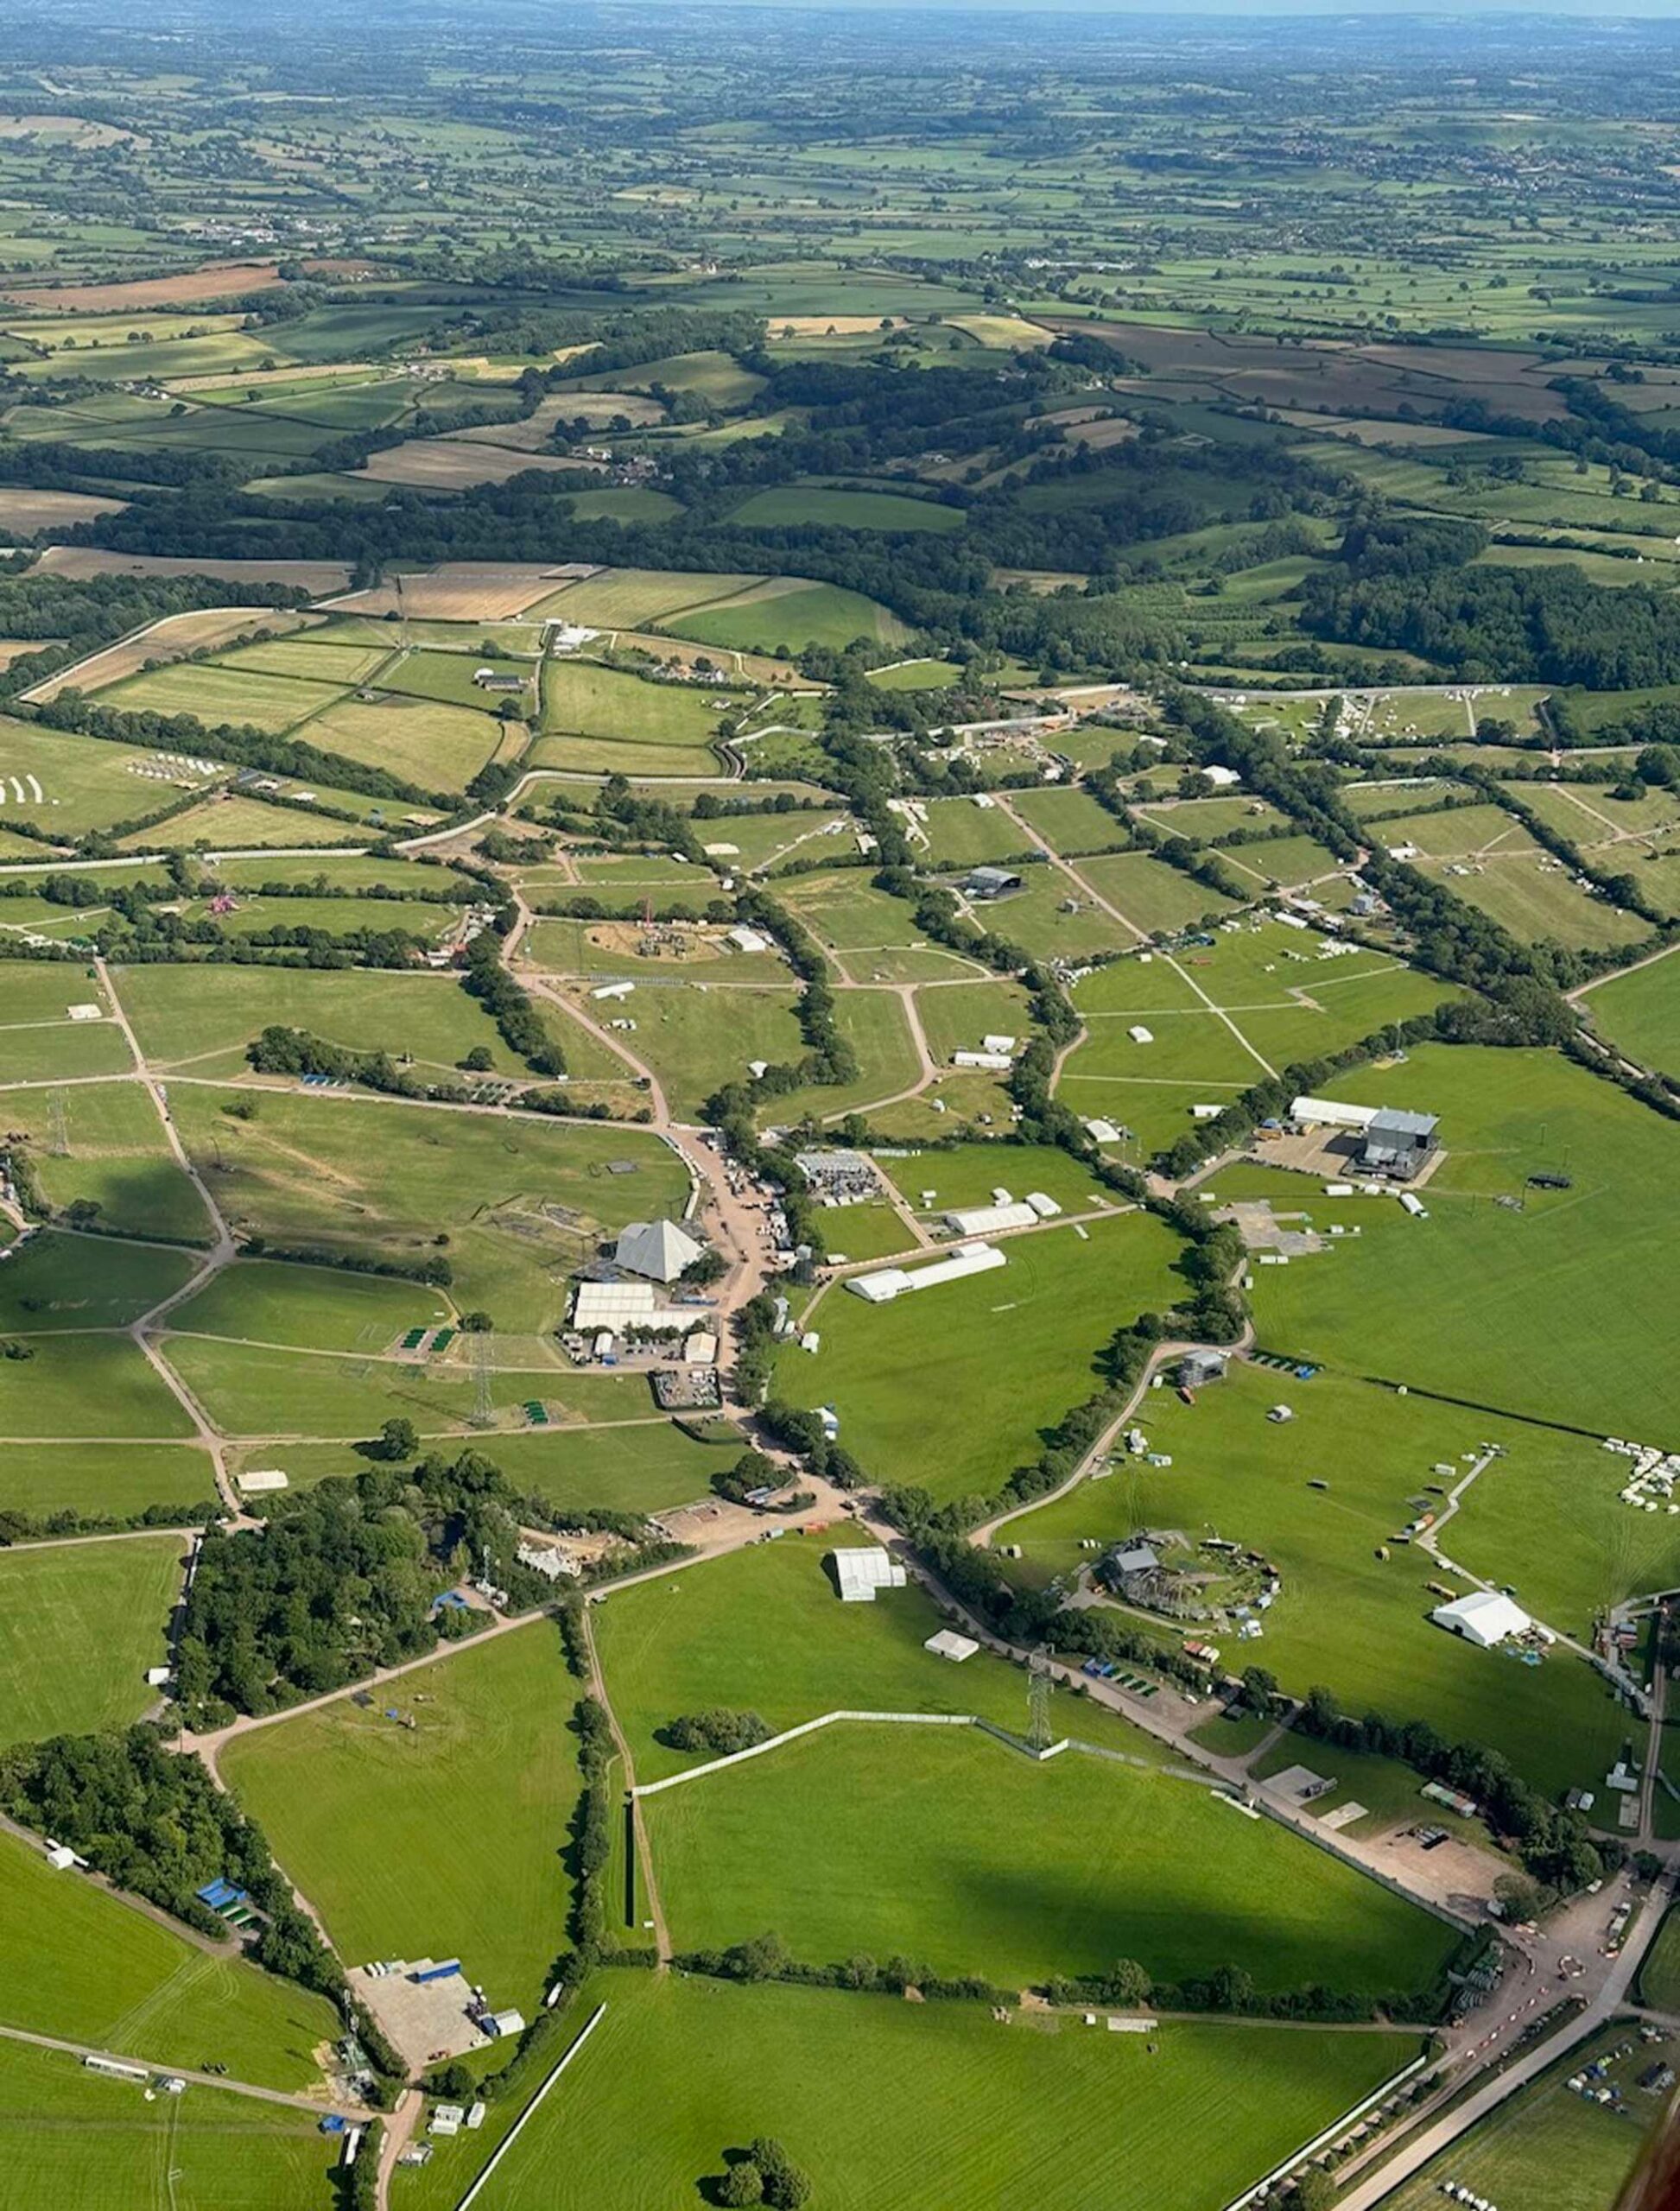 Glastonbury Festival from the air